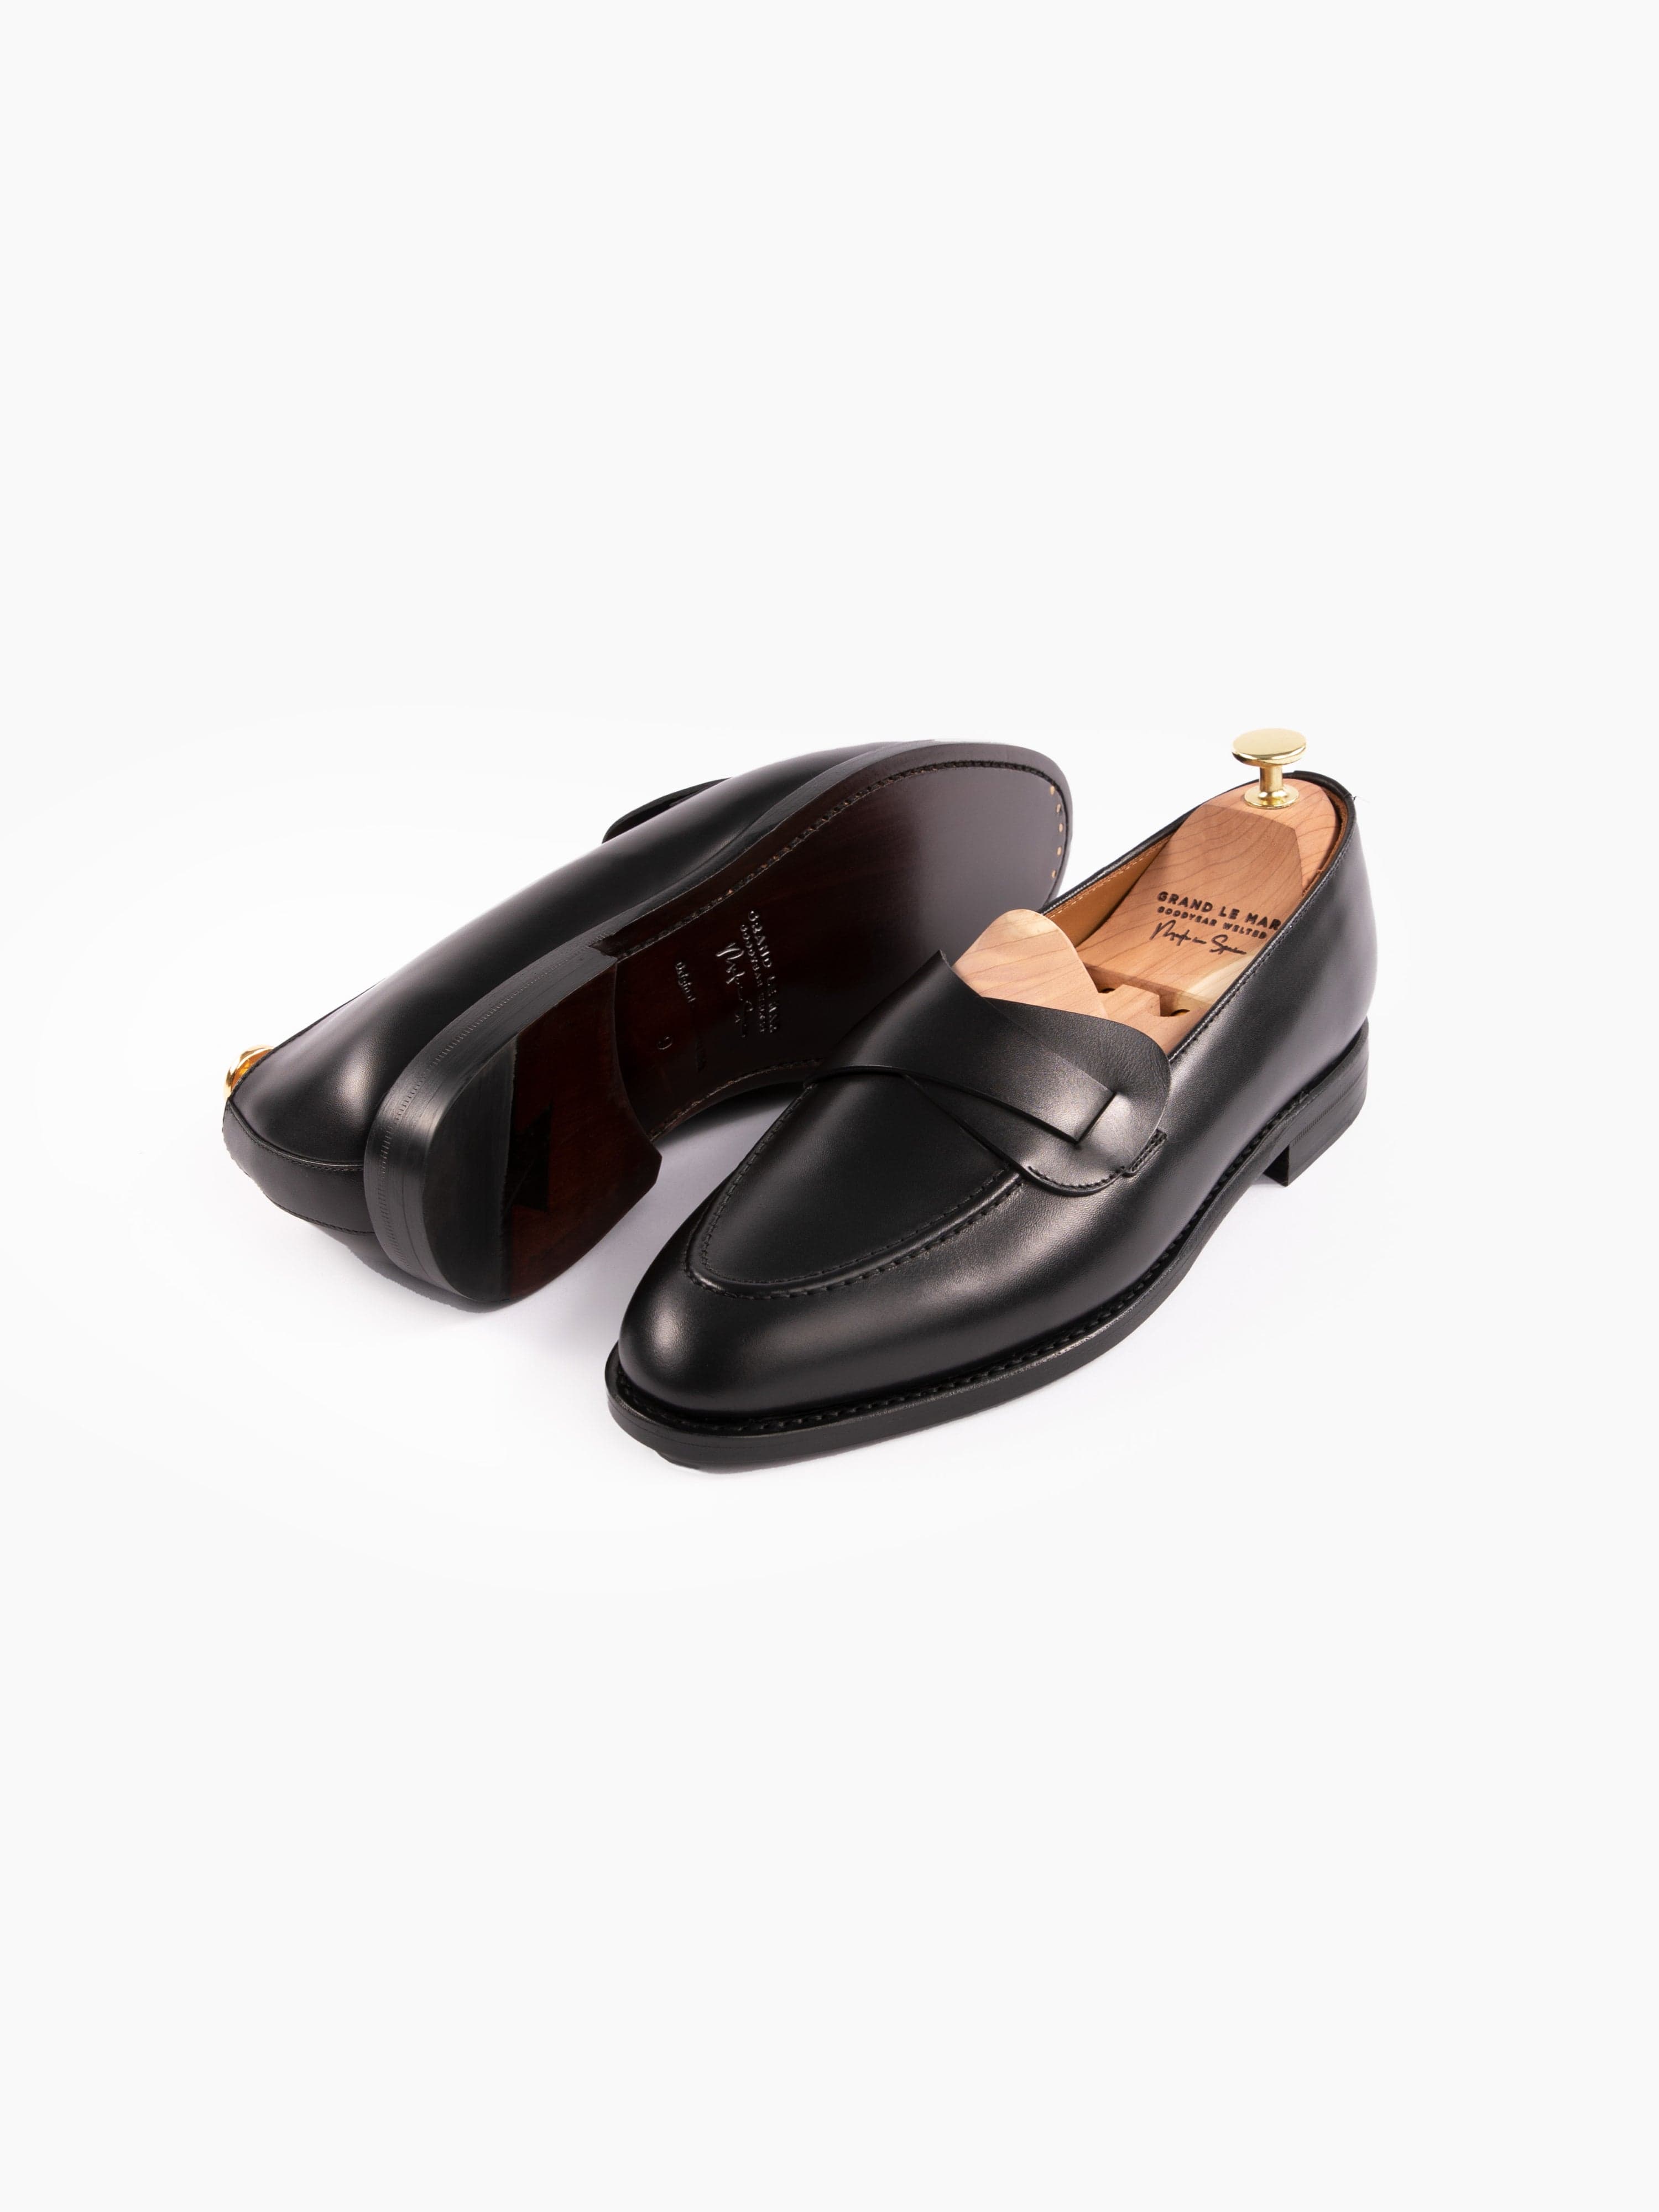 Butterfly Loafers Black Calf Leather - Grand Le Mar